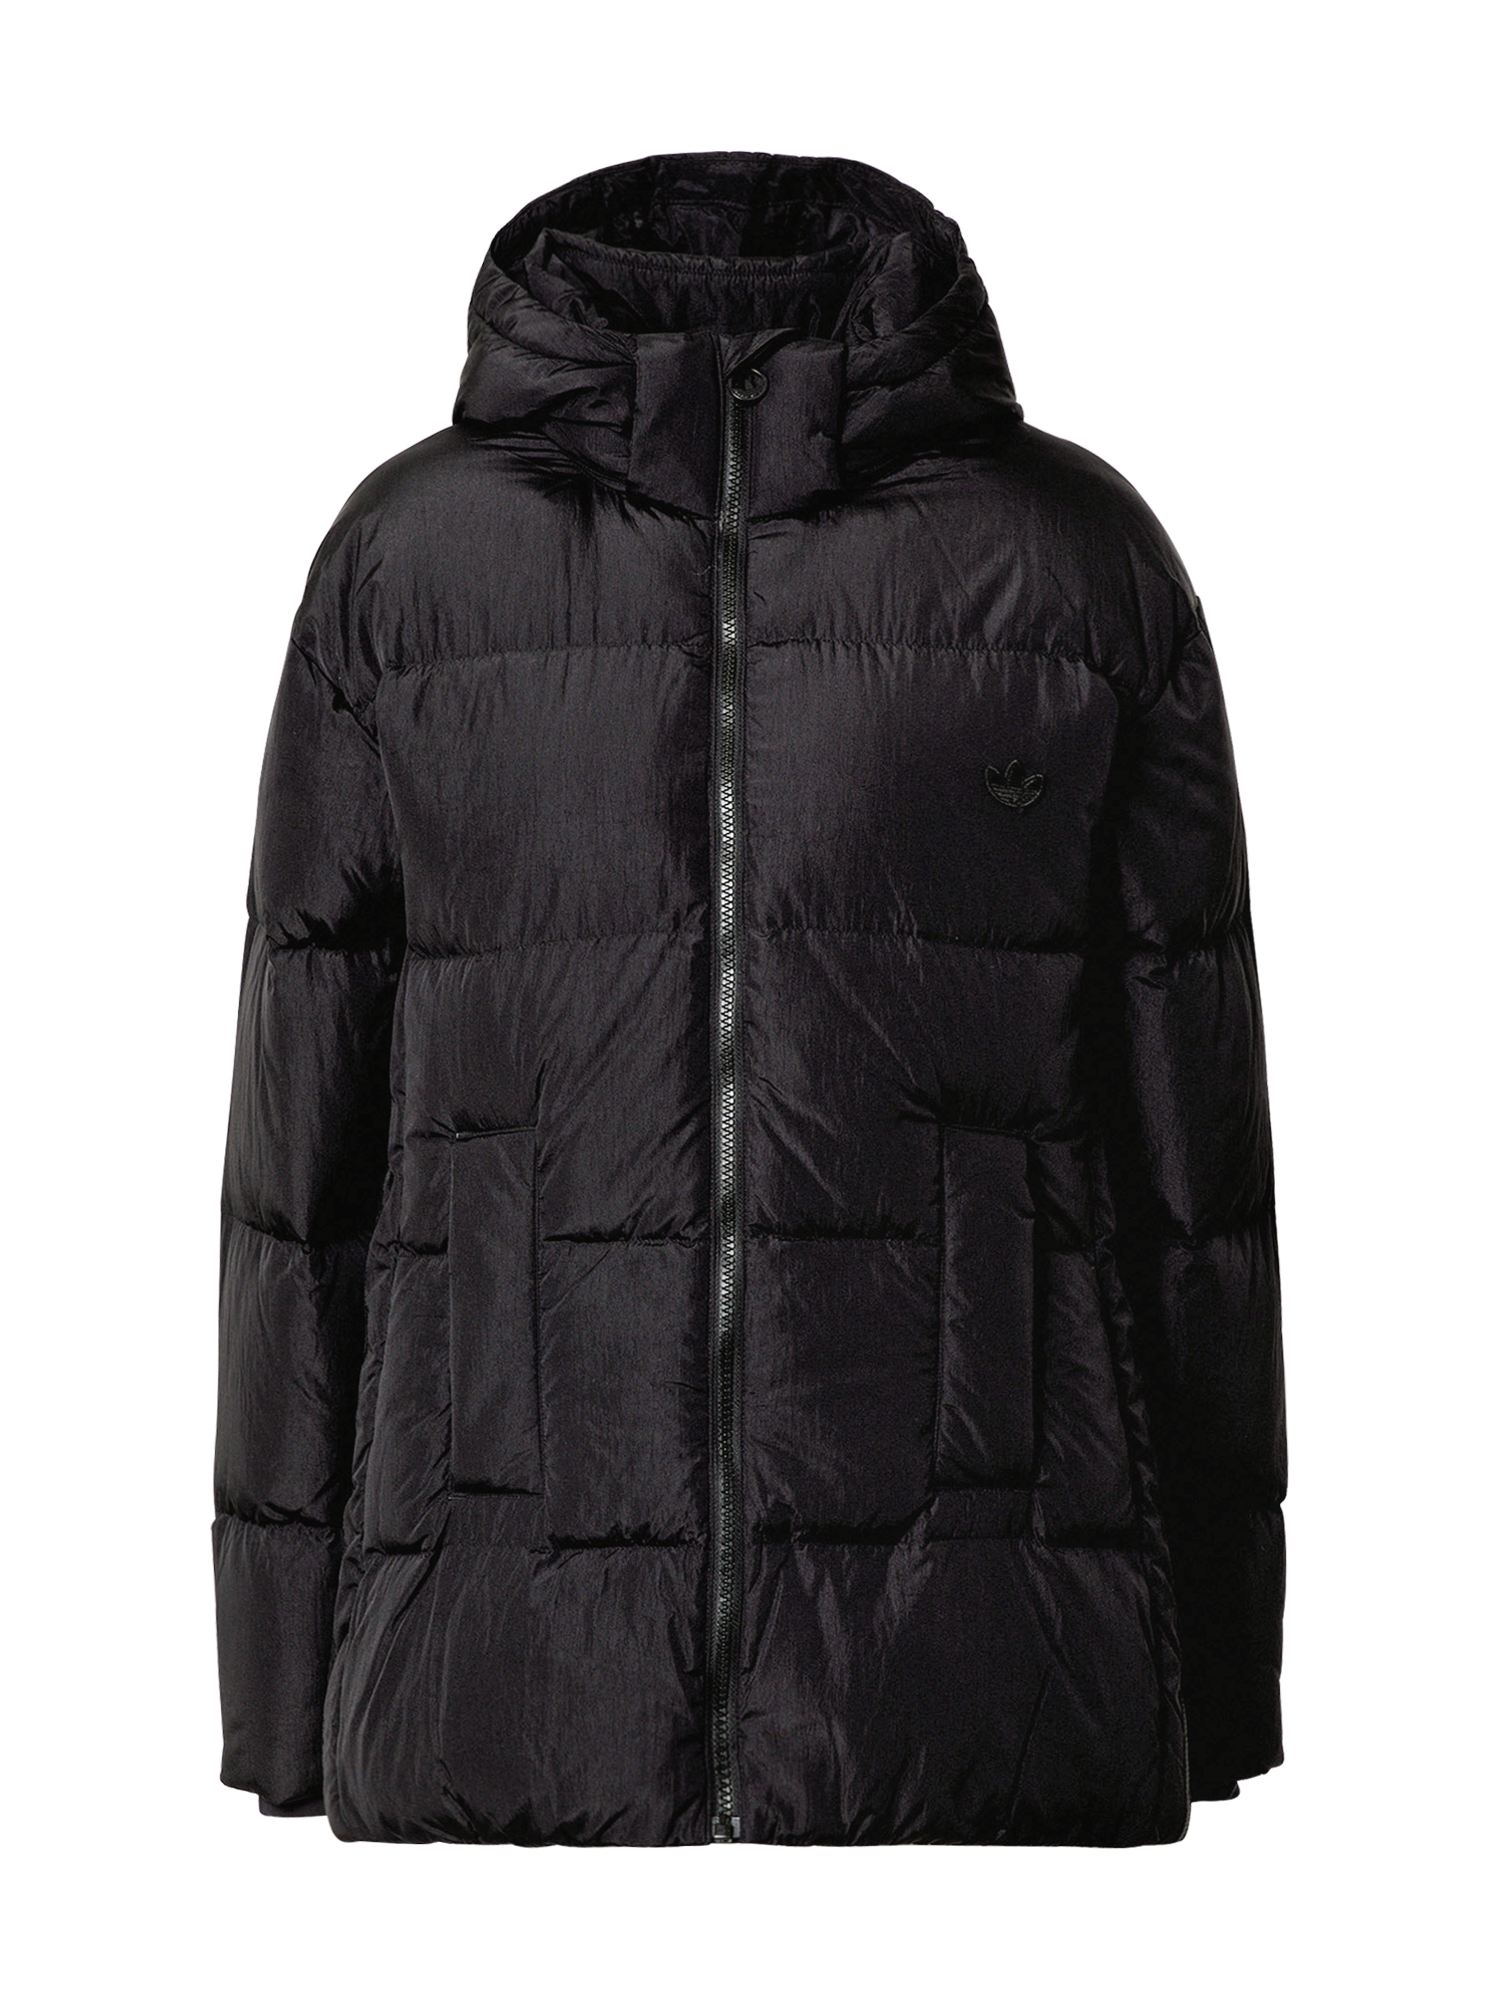 Giacche Jb9wY ADIDAS ORIGINALS Giacca invernale DOWN PUFFER in Nero 